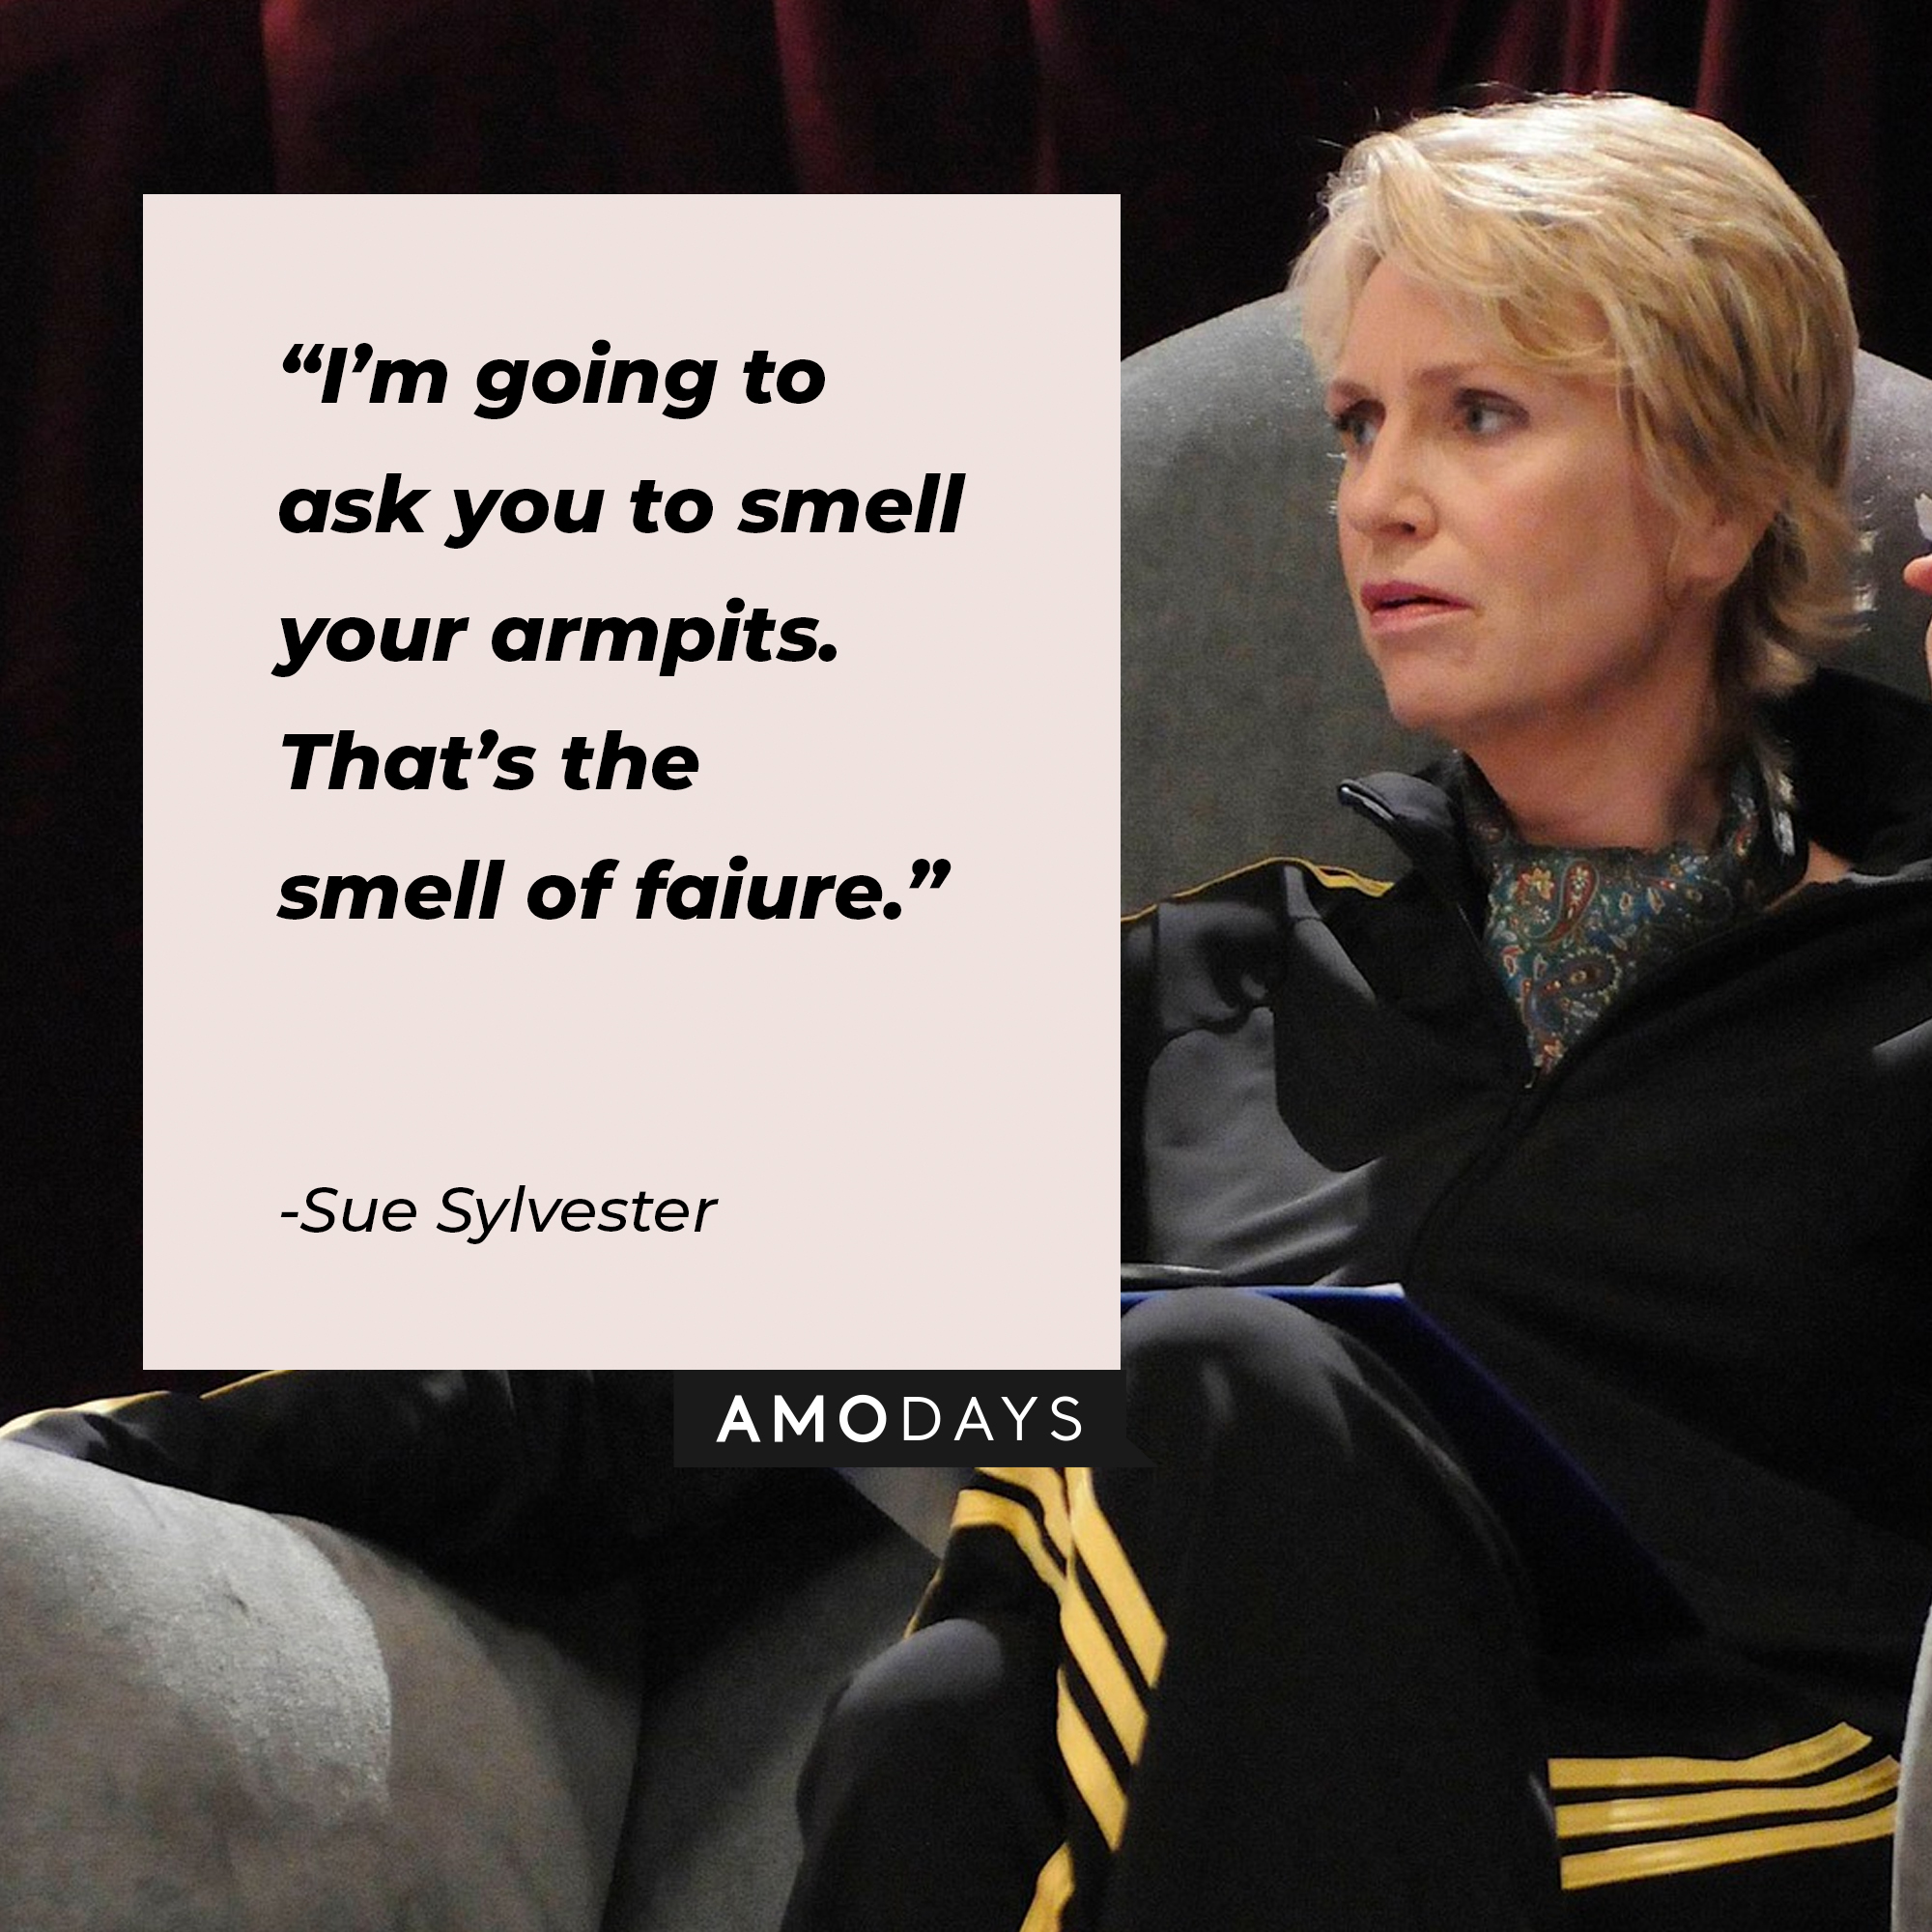 A picture of Sue Sylester with a quote by her : “I’m going to ask you to smell your armpits. That’s the smell of failure.” | Source: facebook.com/Glee